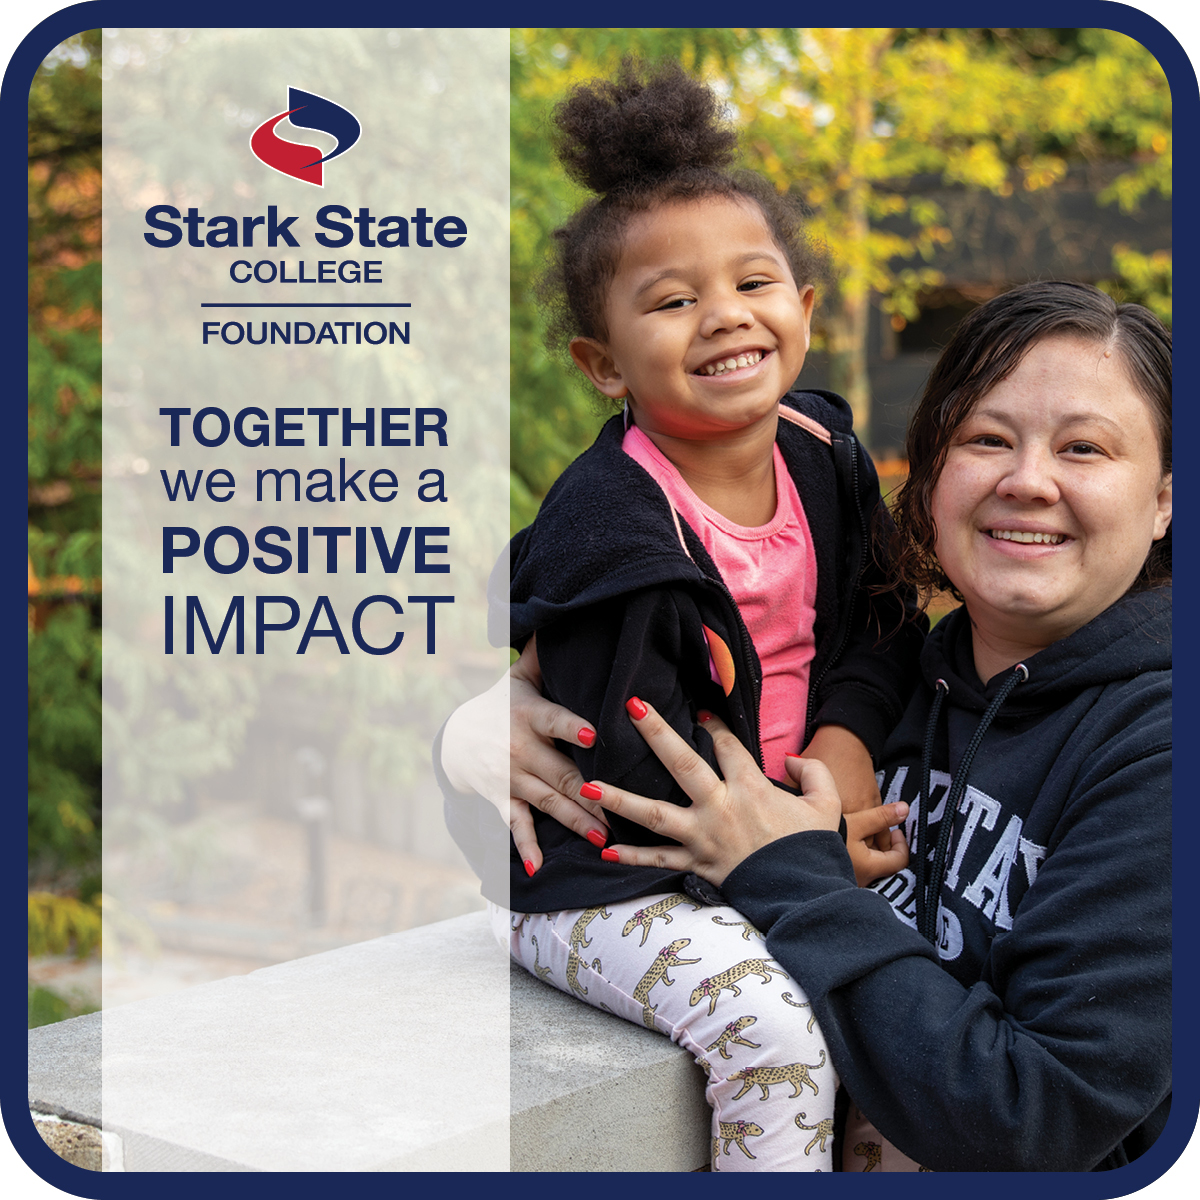 Stark State College Foundation - Together we make a positive impact